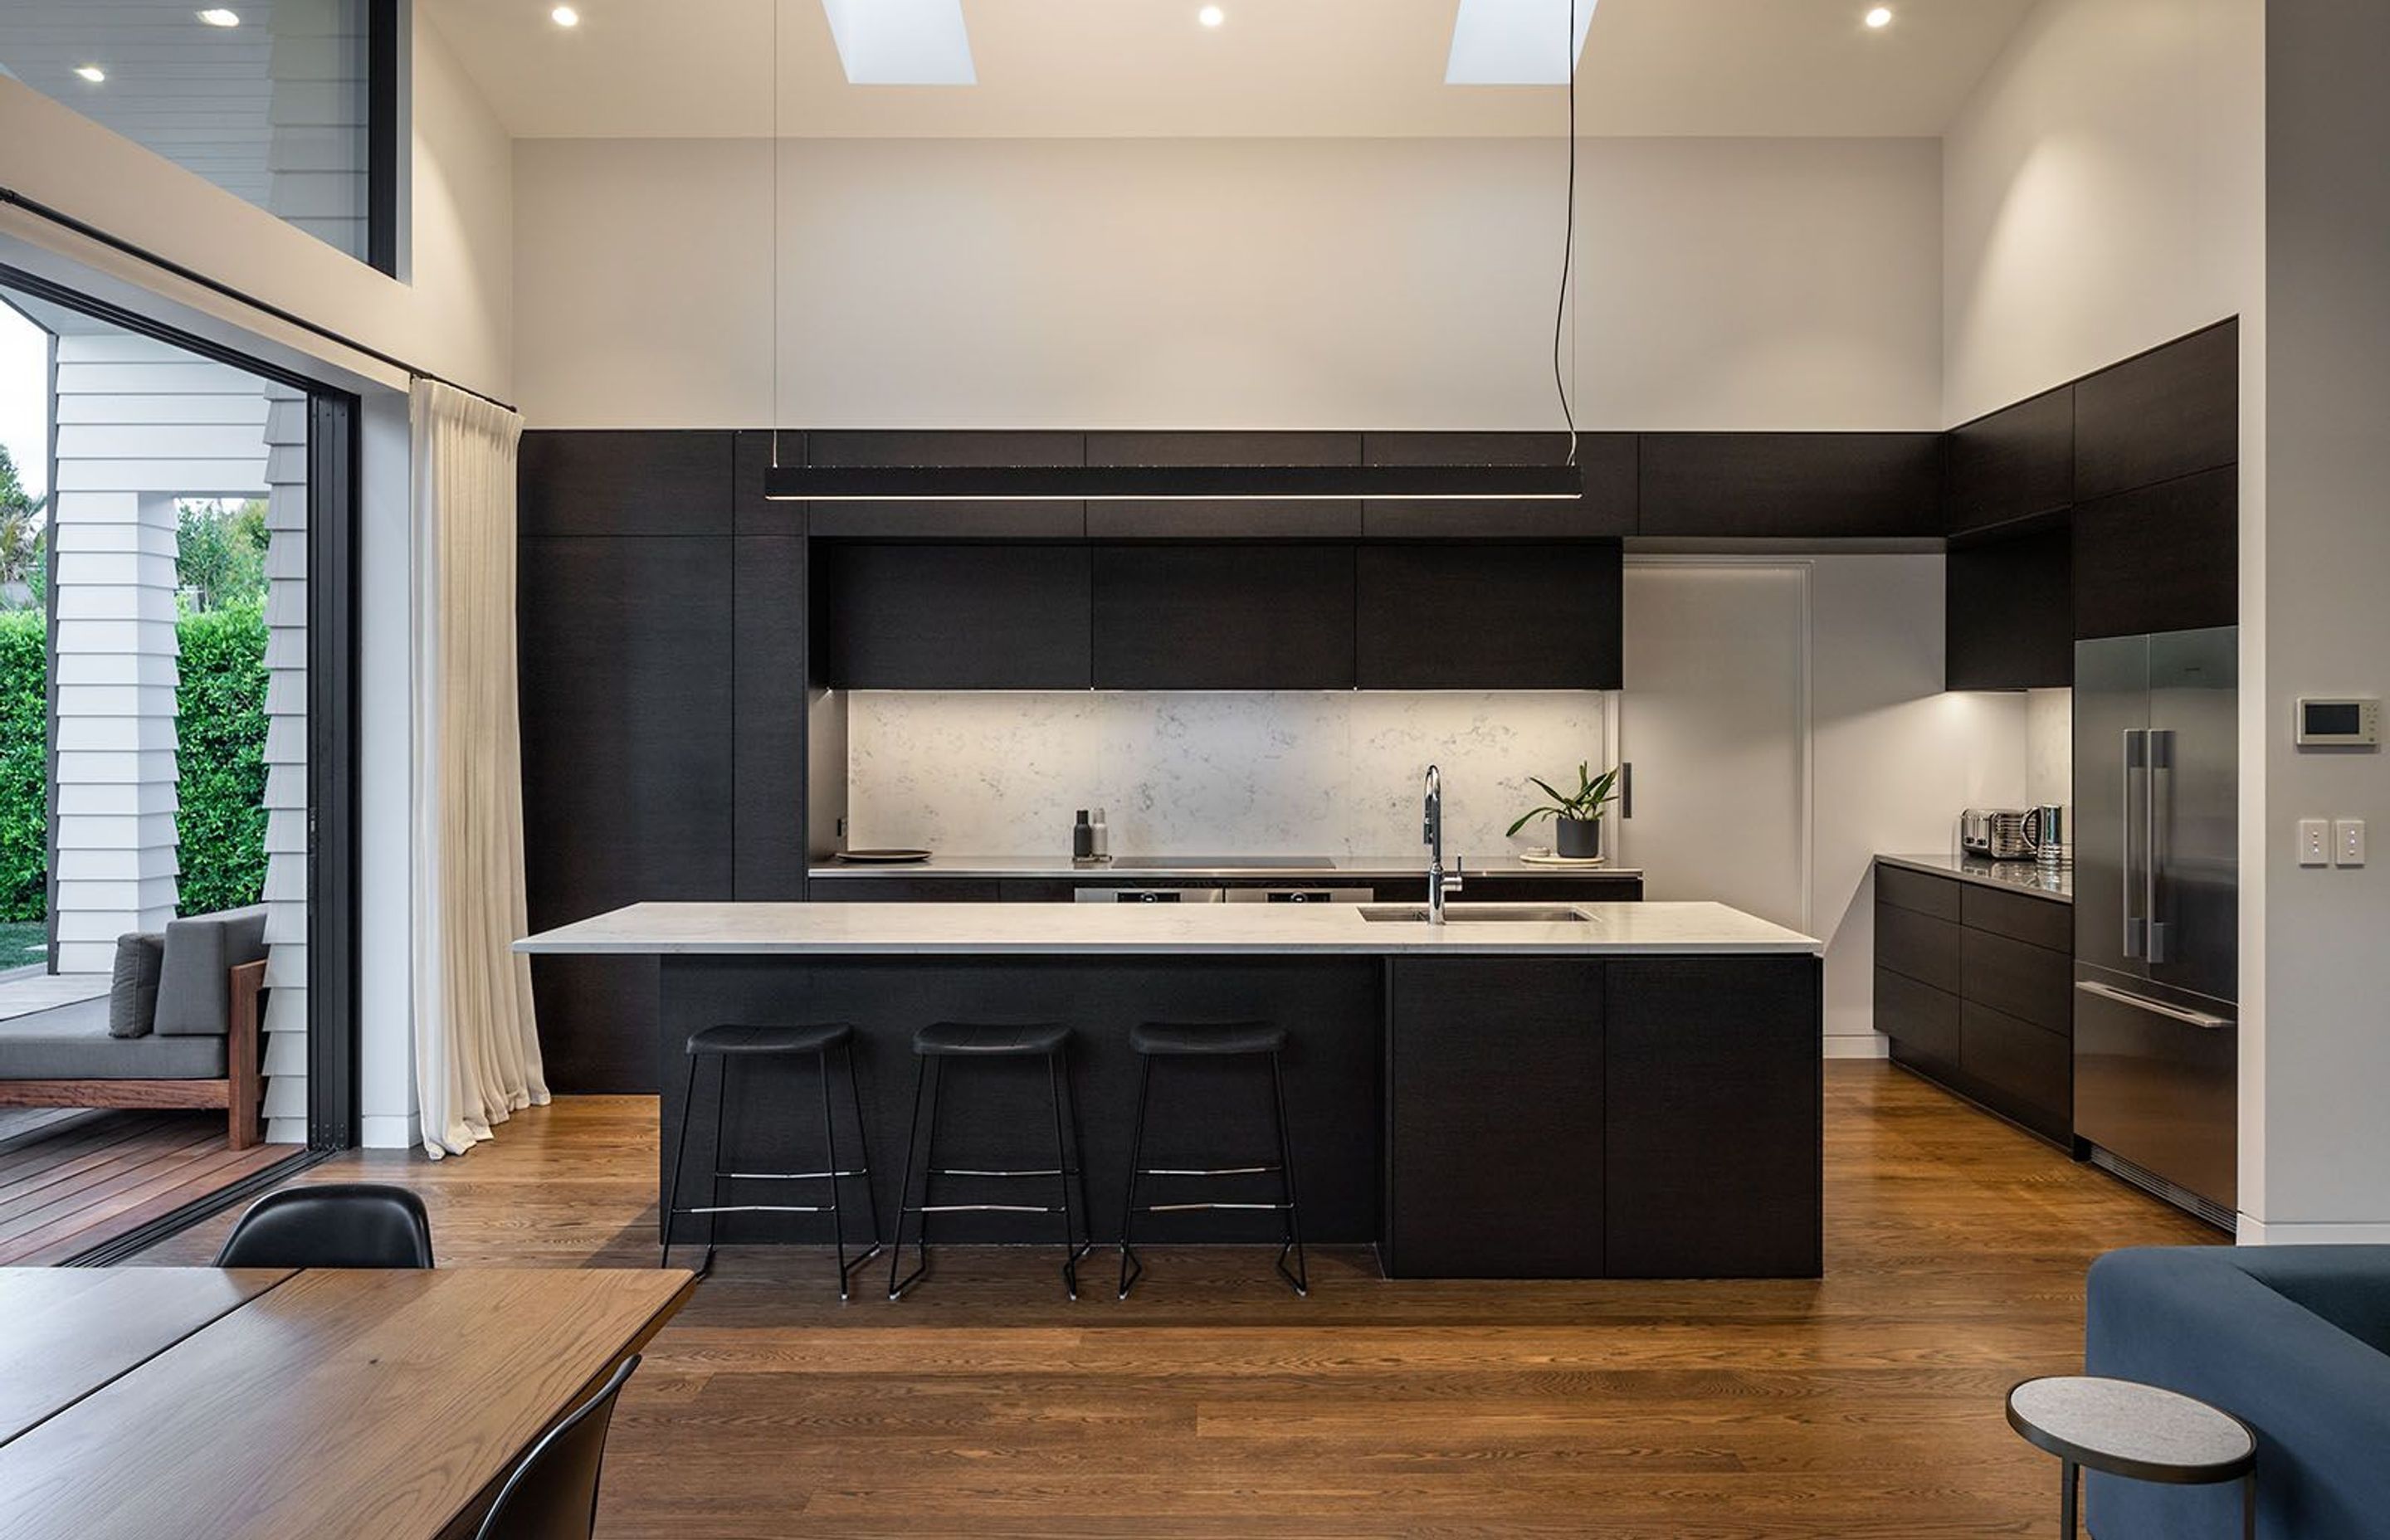 Dark tones were chosen for the kitchen cabinetry to help the space recede into the background. Behind the white cavity slider on the right is the scullery. The large 'cabinet' to the left is actually a doorway to the laundry and garage.